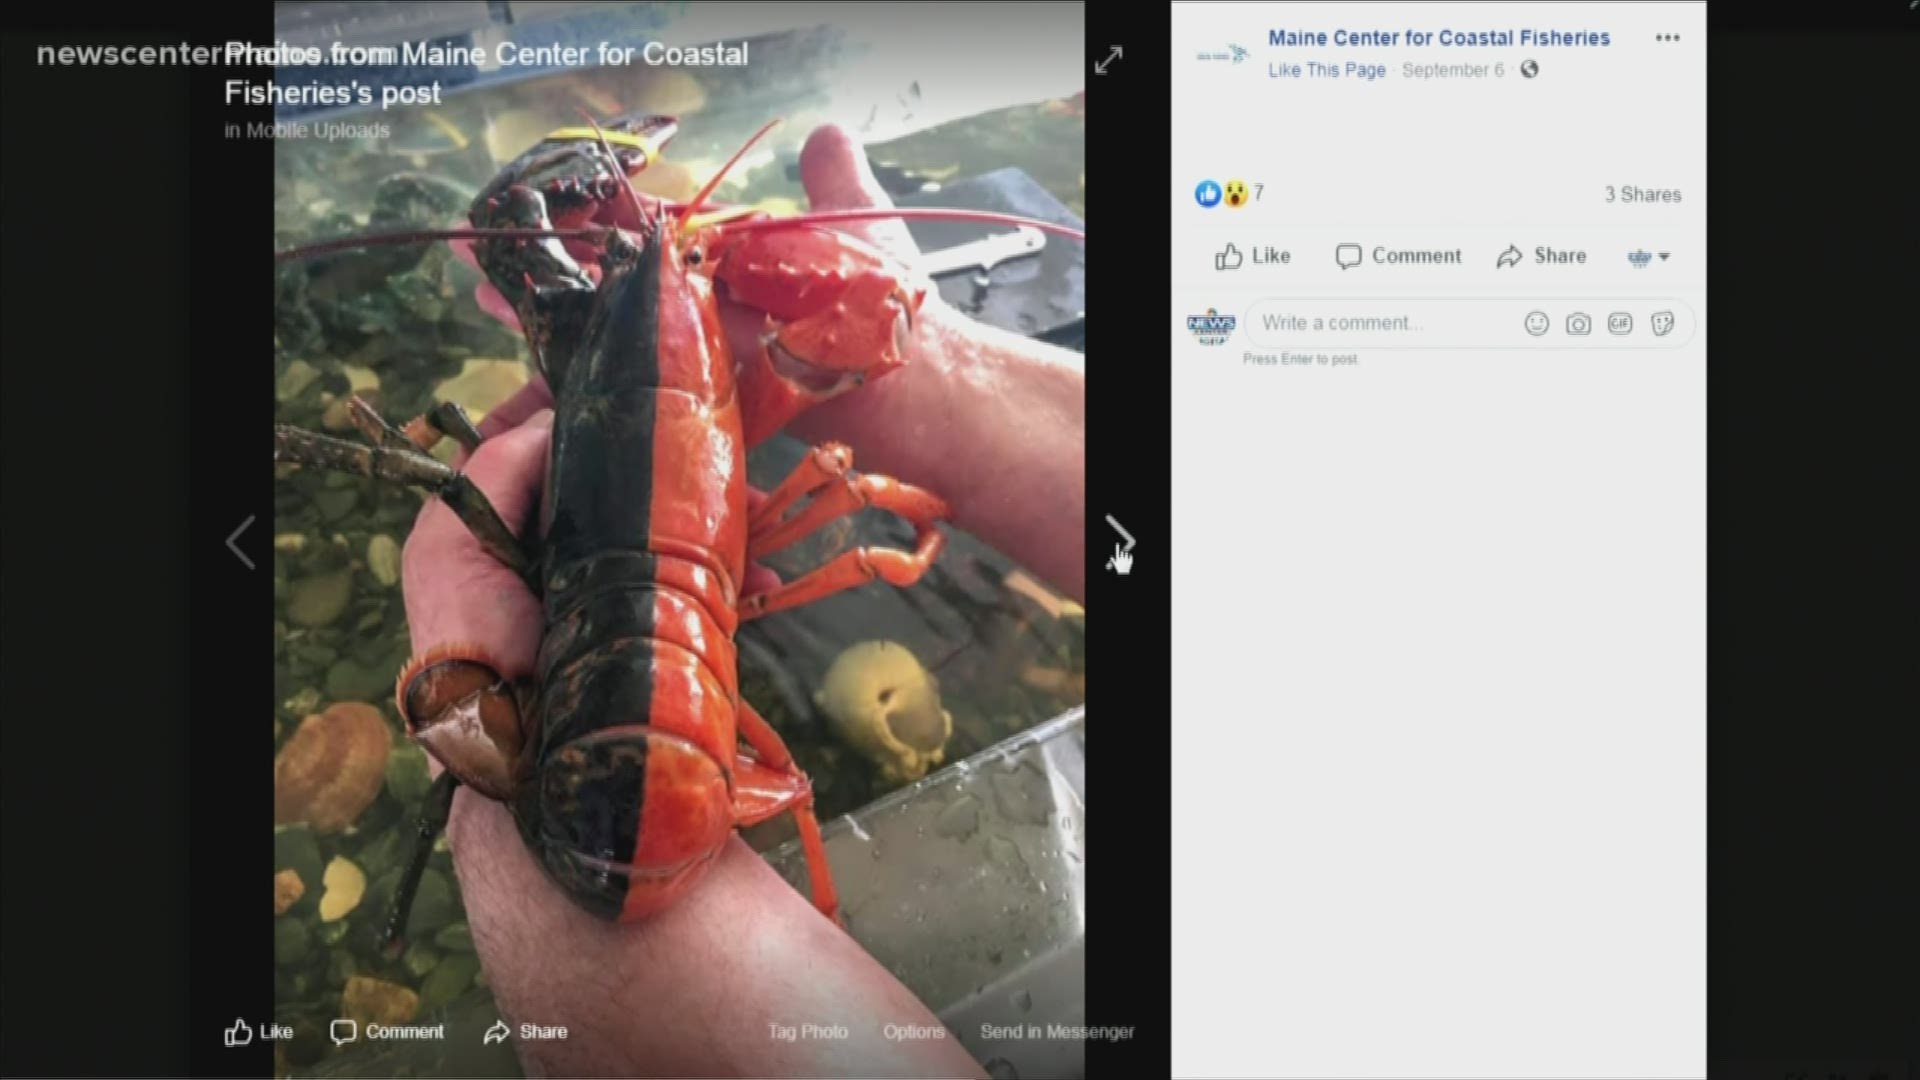 Two-tone lobster found in Maine